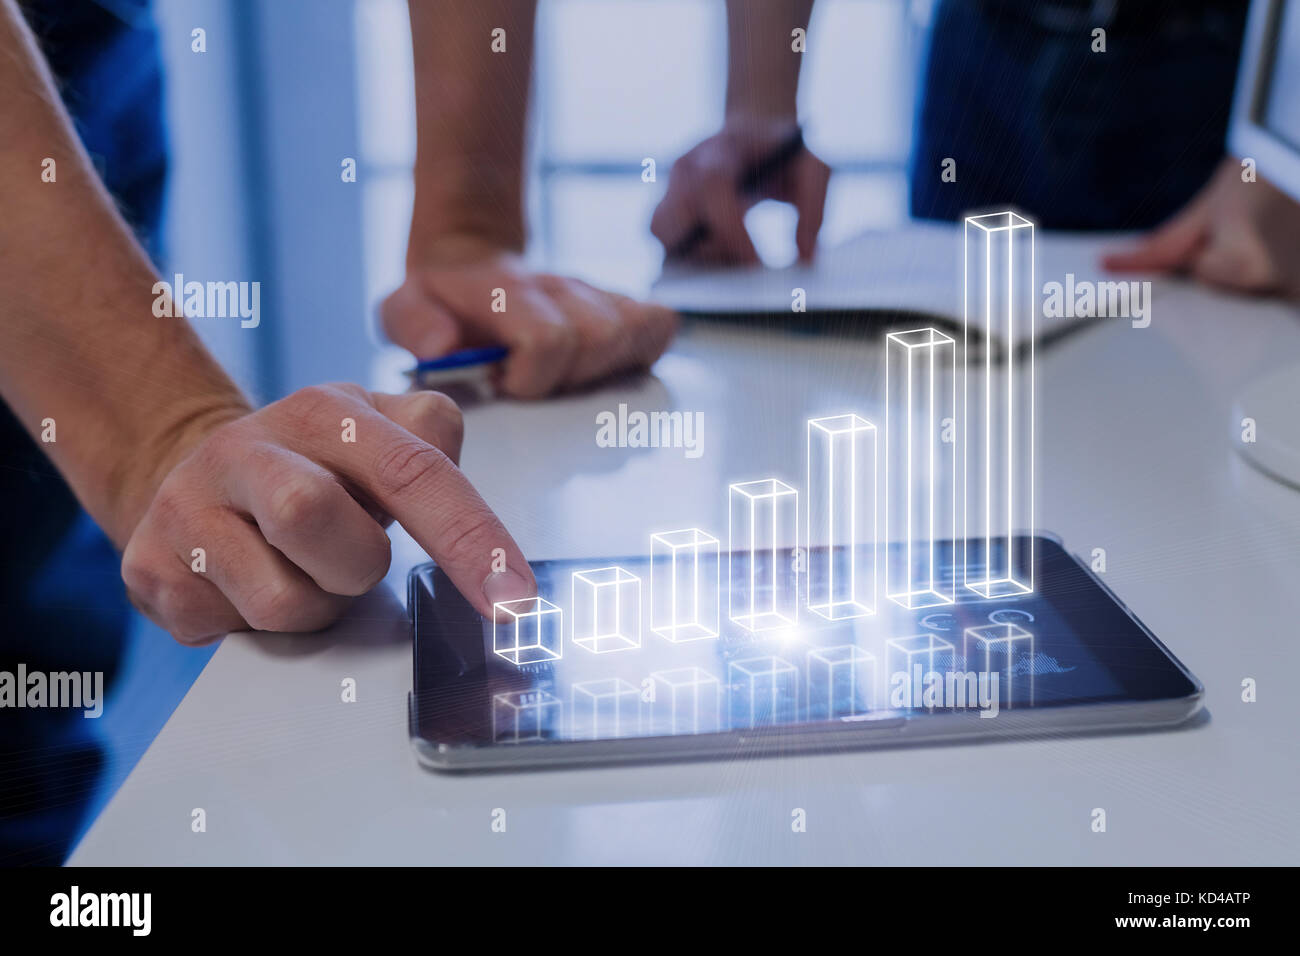 Team of business people analyzing 3D augmented reality chart above digital tablet computer screen showing growing results and investment success, tech Stock Photo